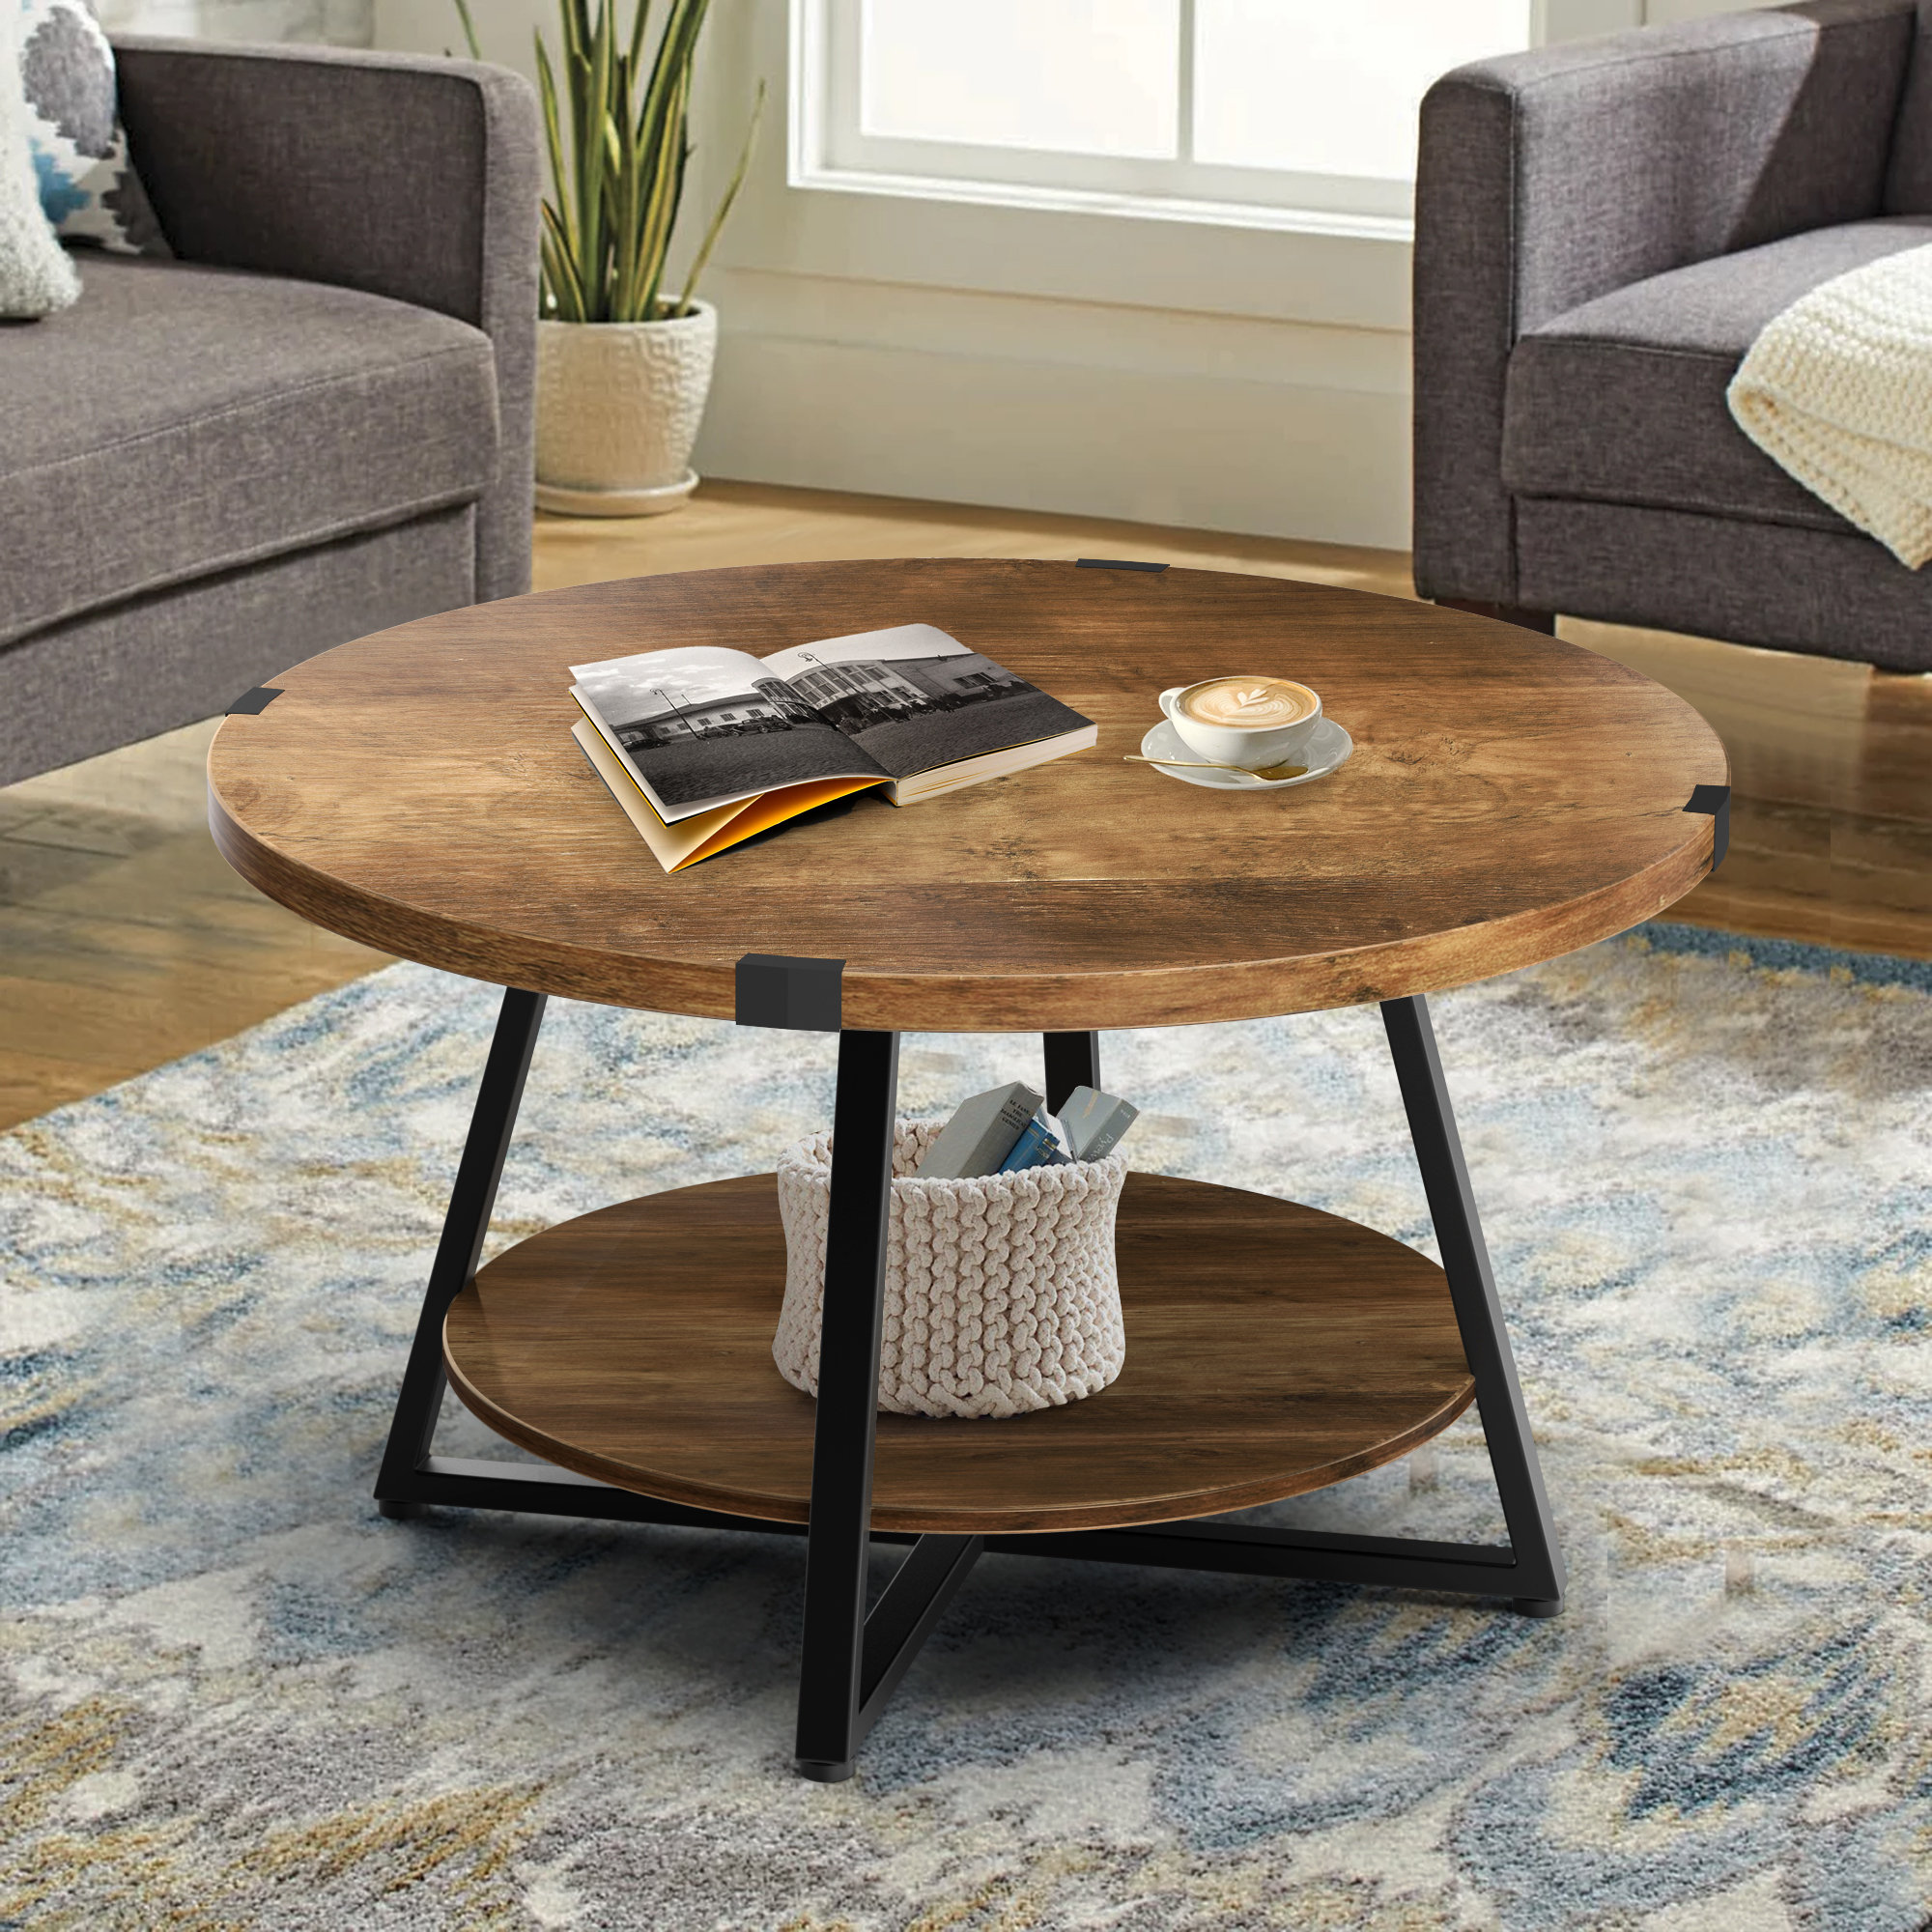 Furniture Center Tables - Glass 2 1 Combination Coffee Table Solid